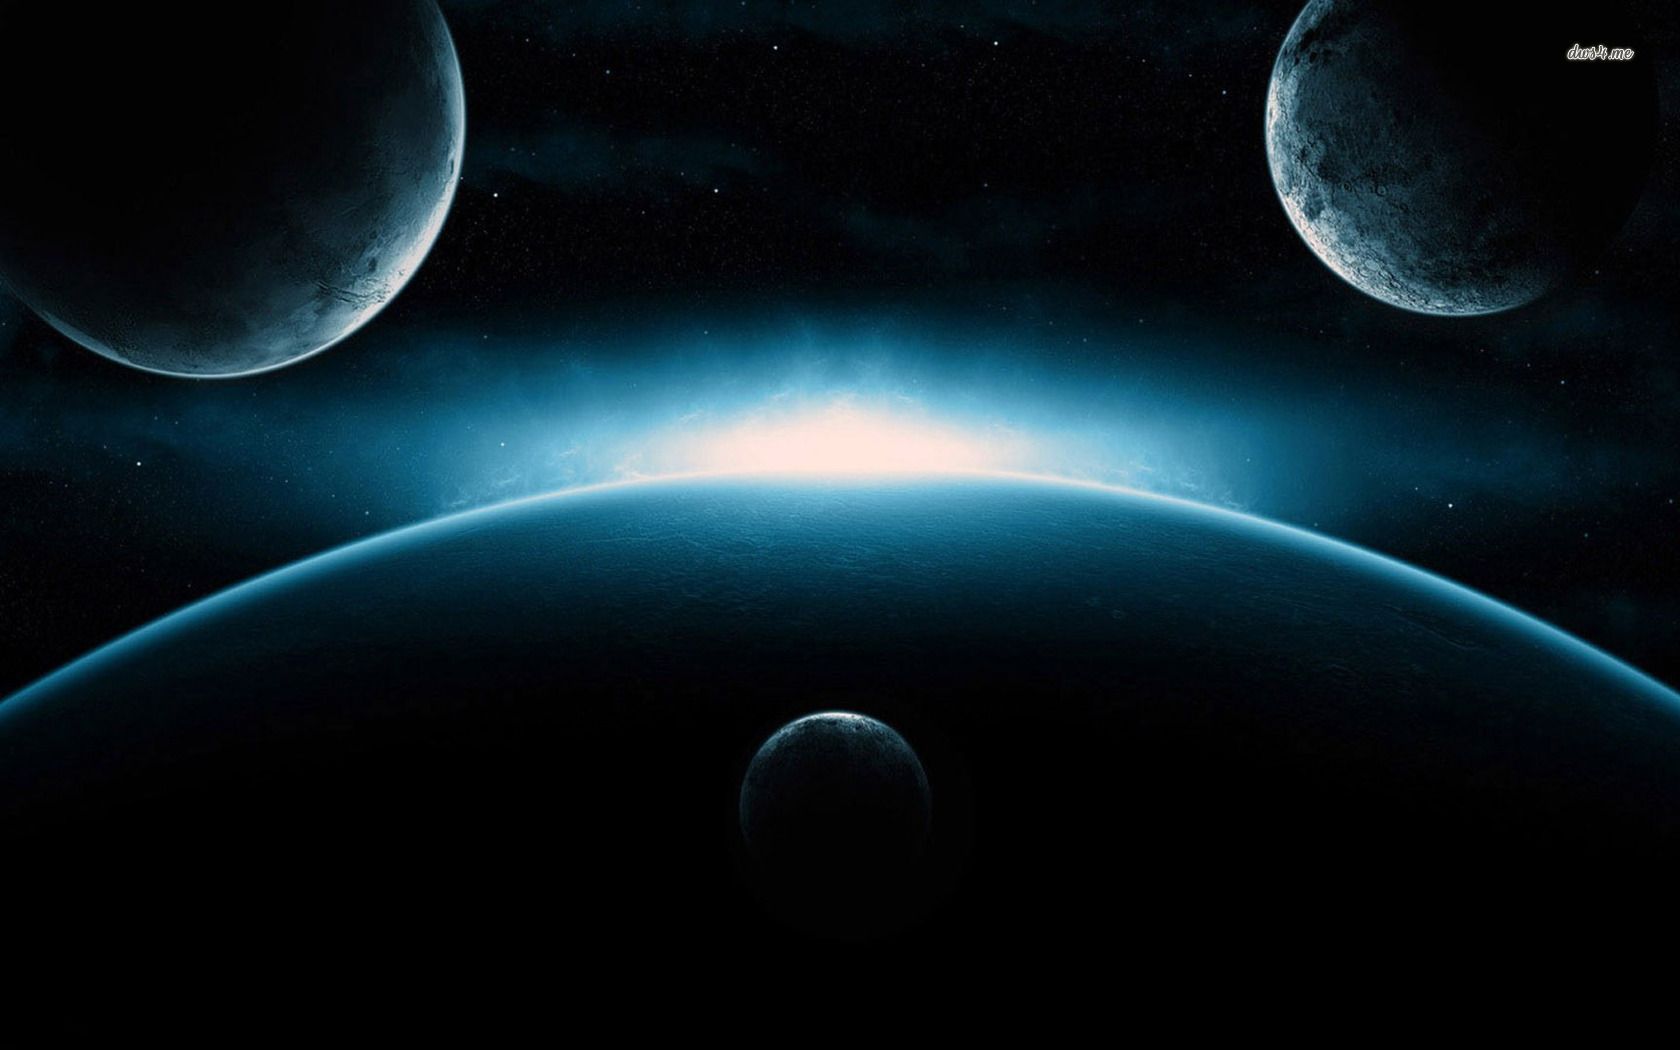 Blue planets wallpaper - Fantasy wallpapers - #13028